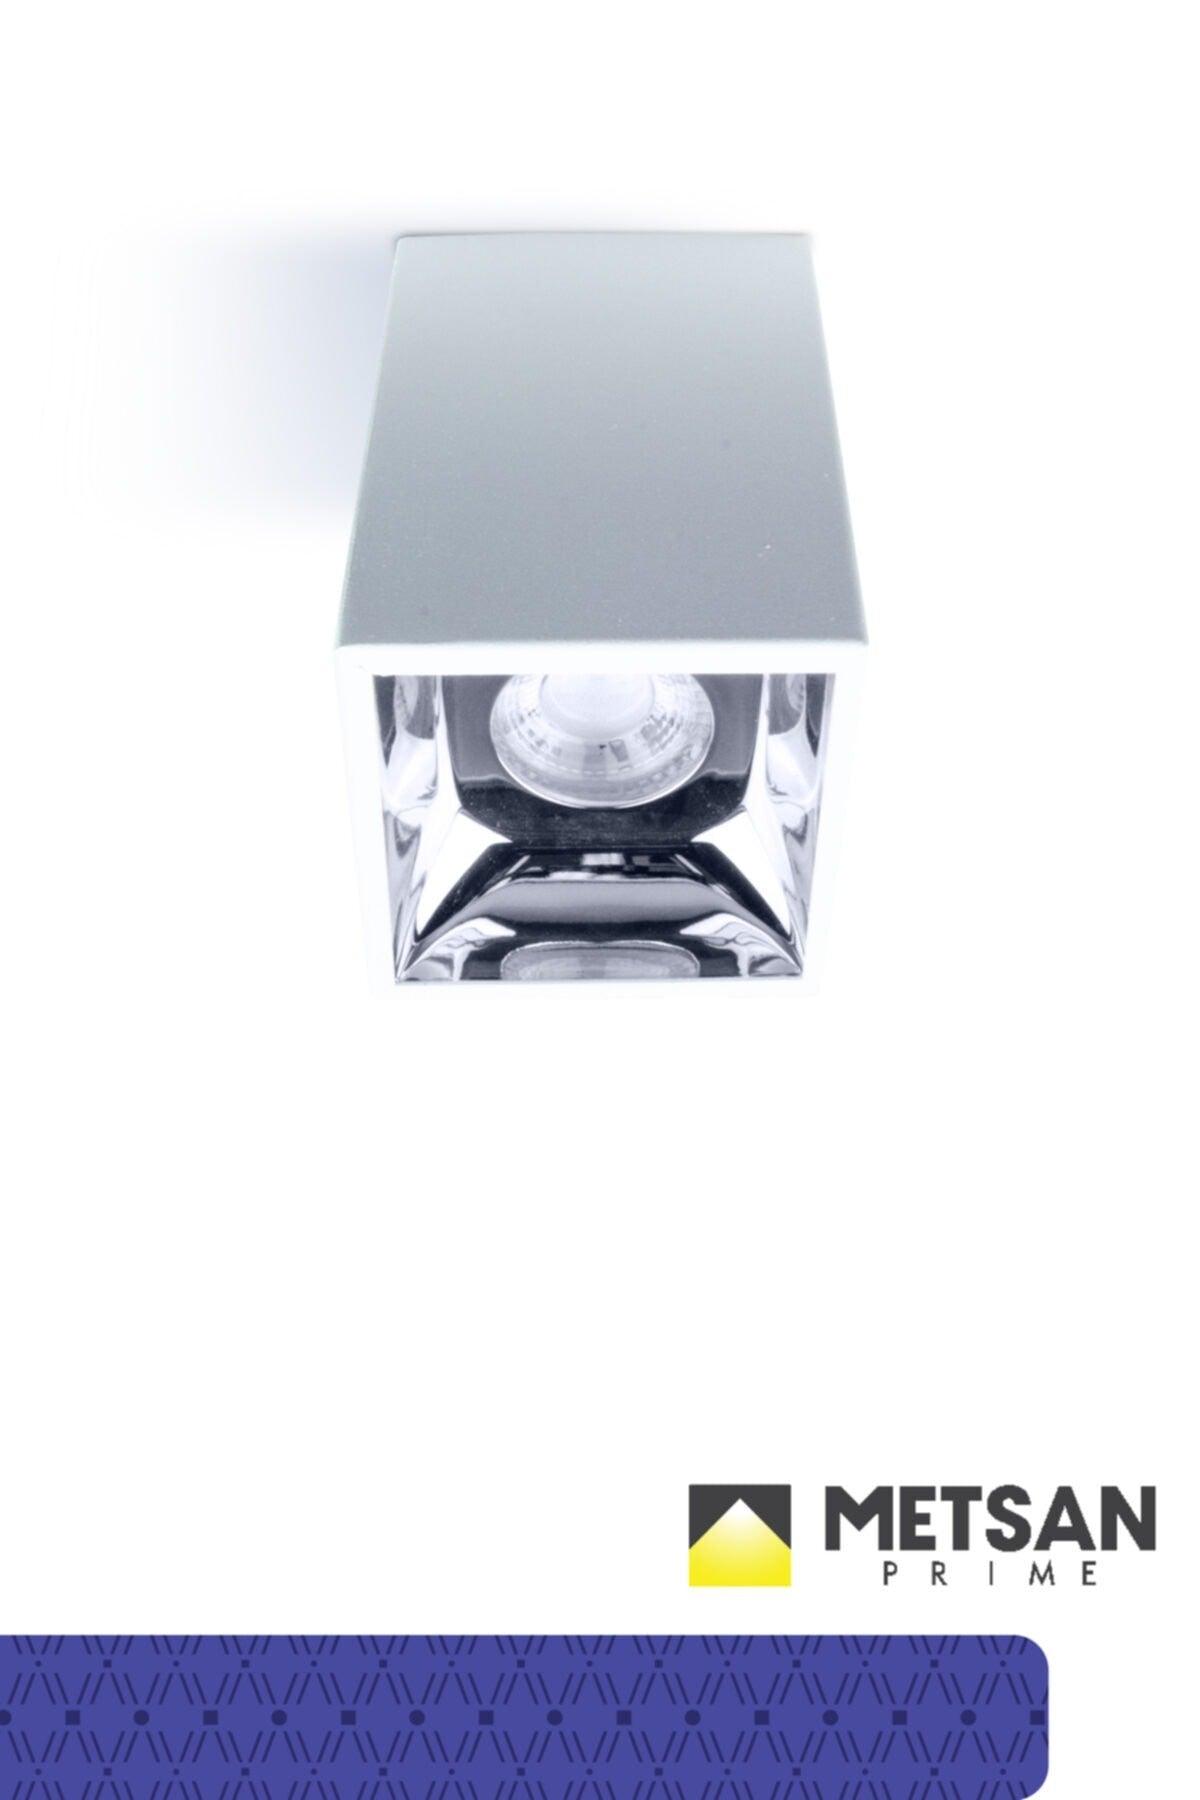 Surface Mounted Platinum Plated Reflector Spot